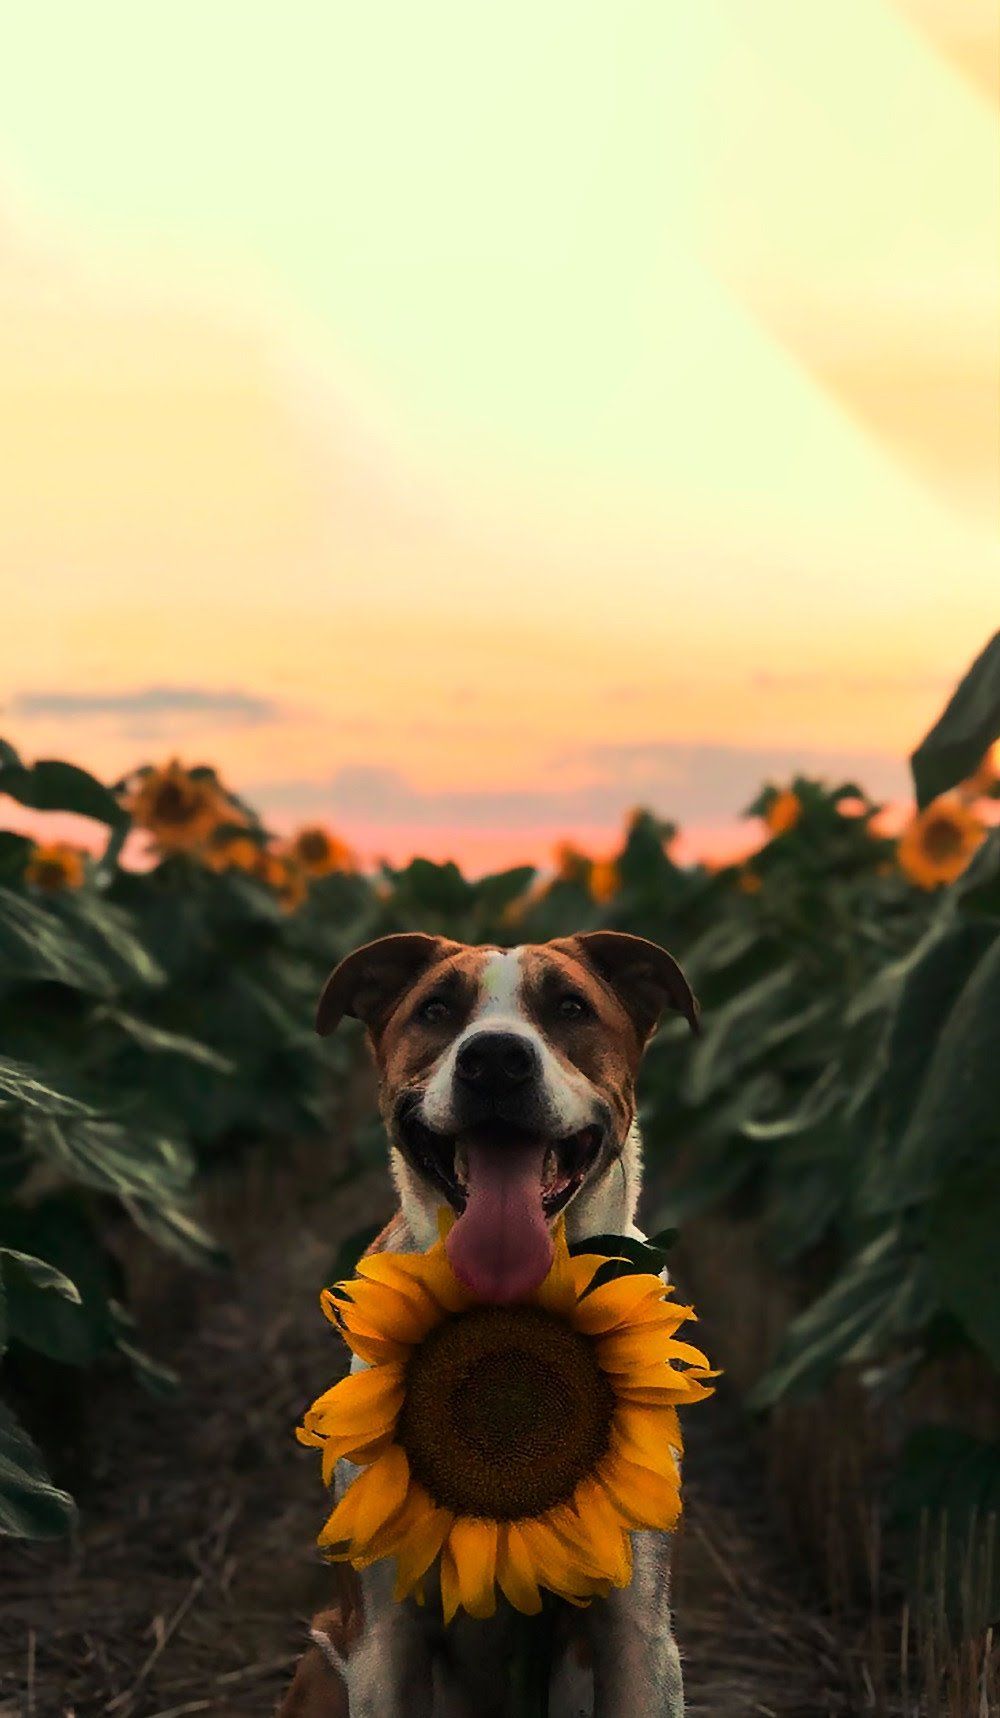 A dog with a sunflower in its mouth - Sunflower